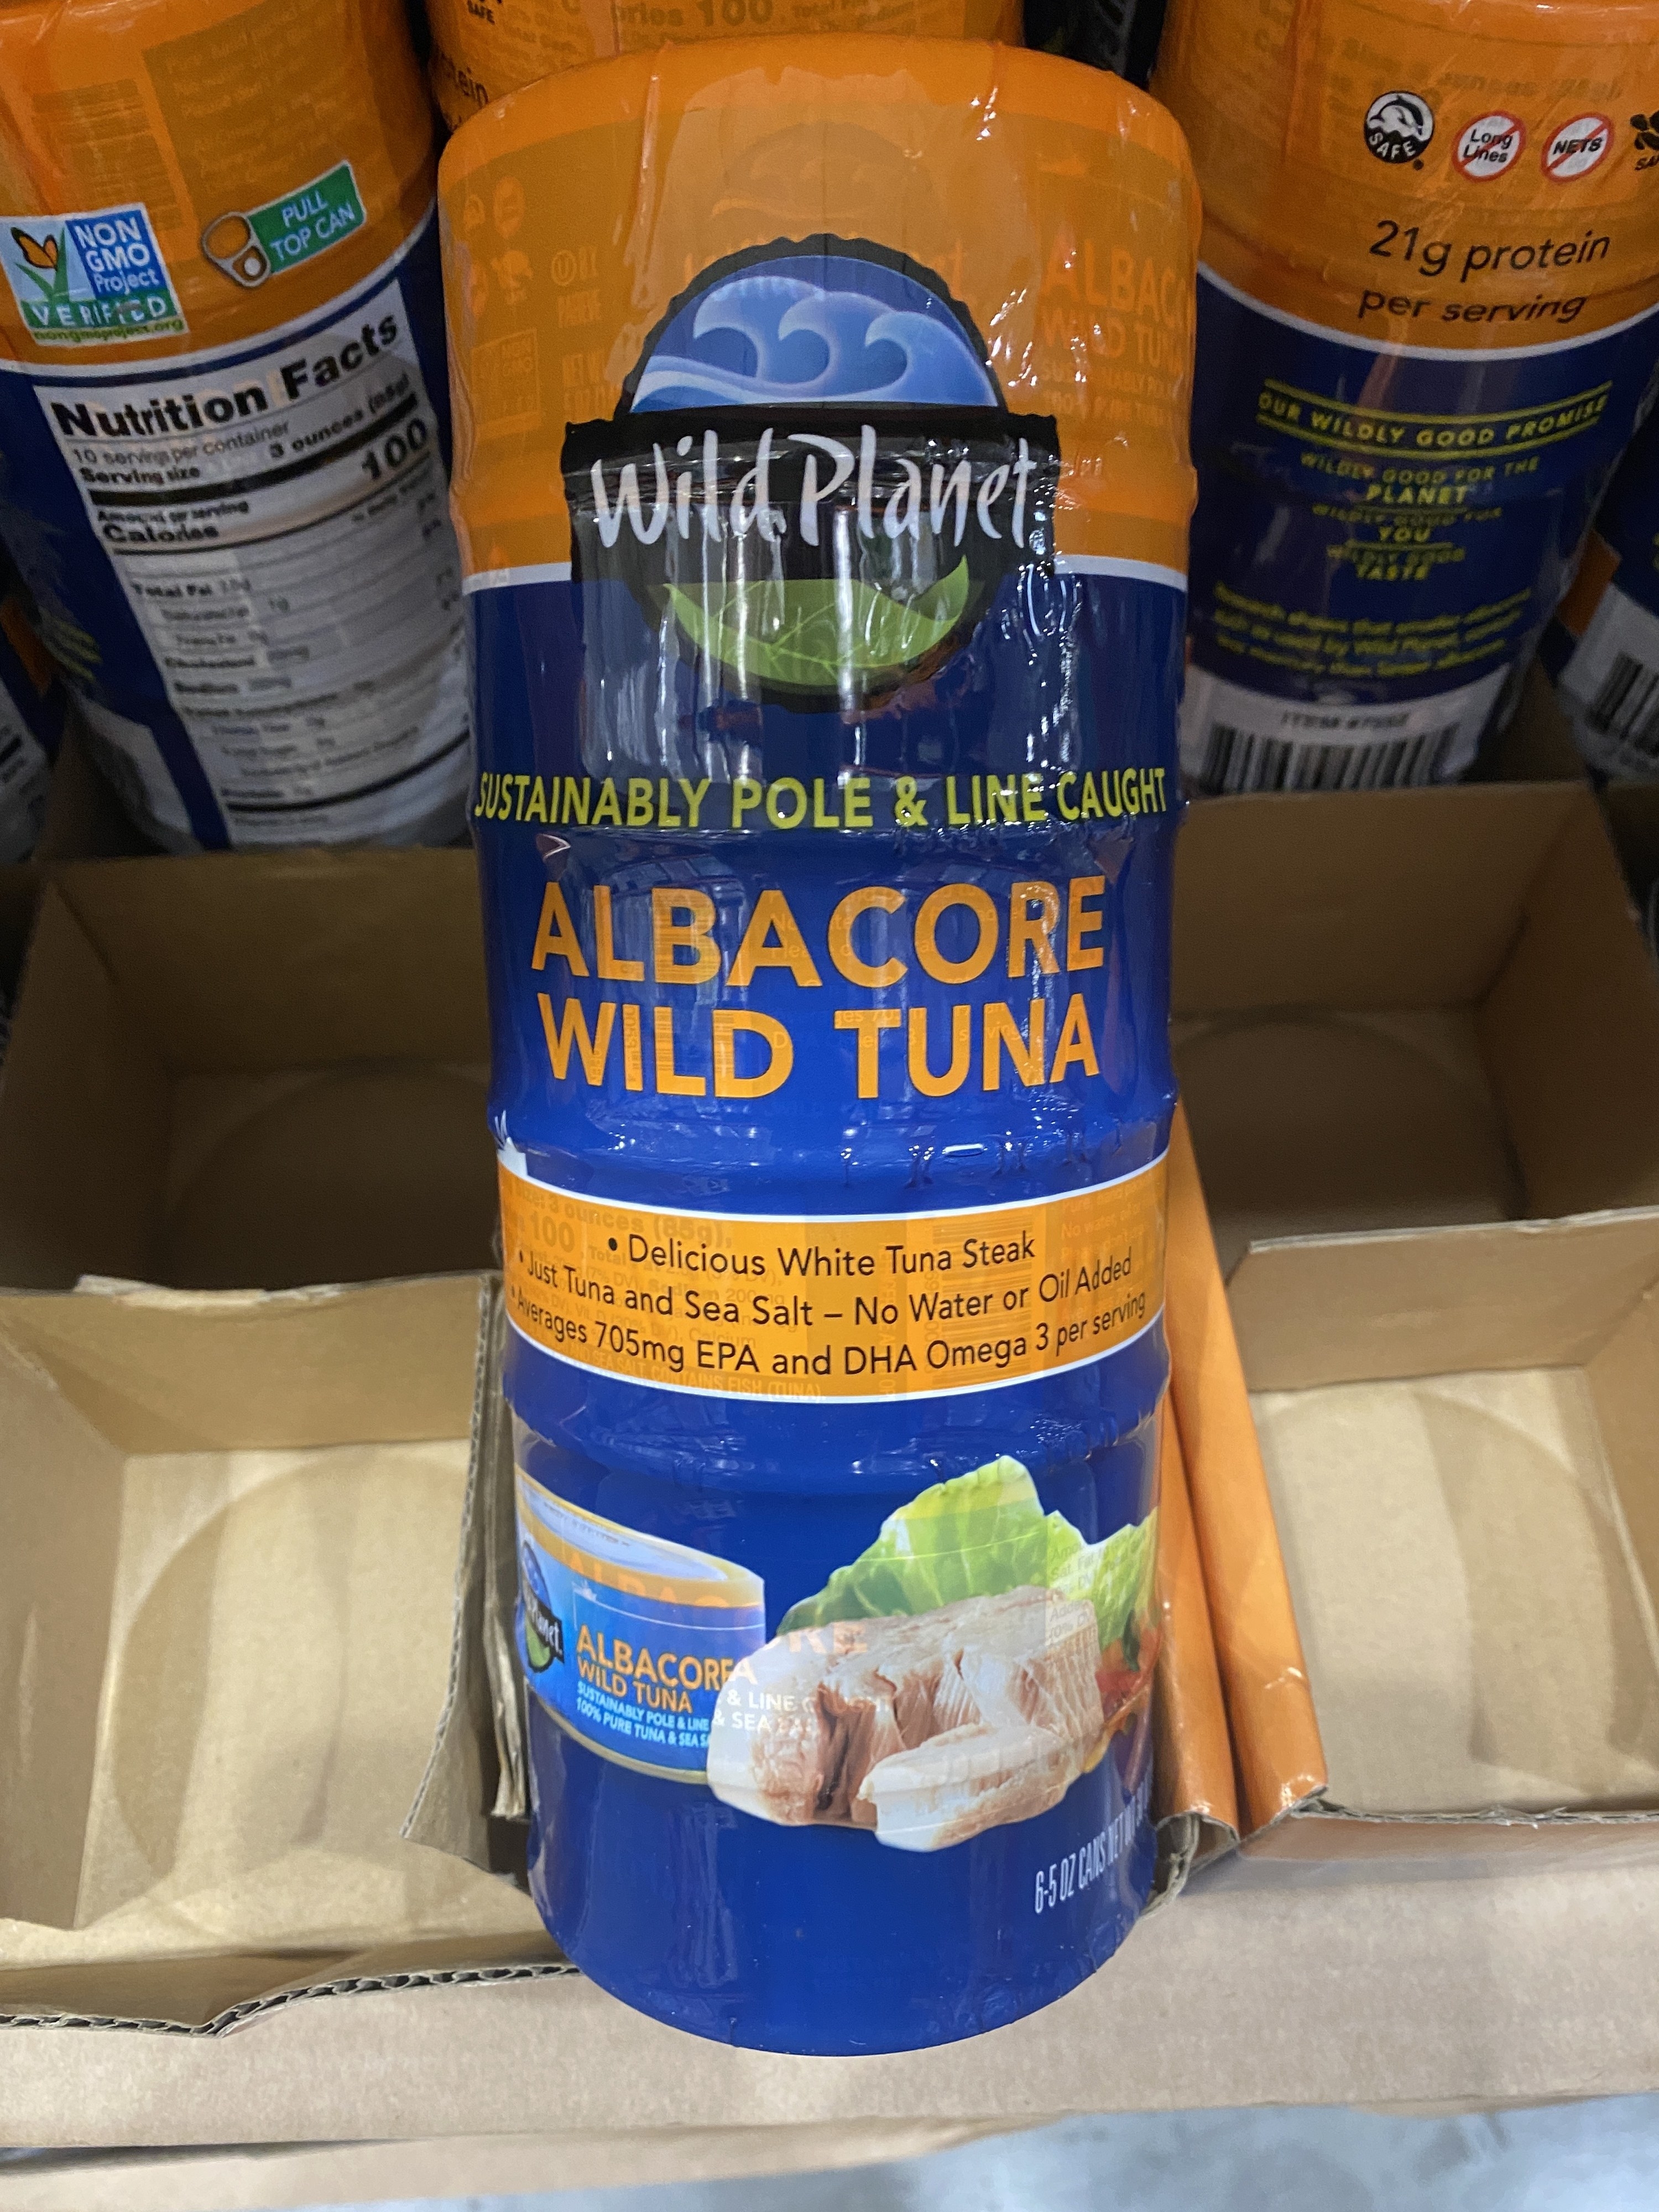 A packaged stack of tuna cans